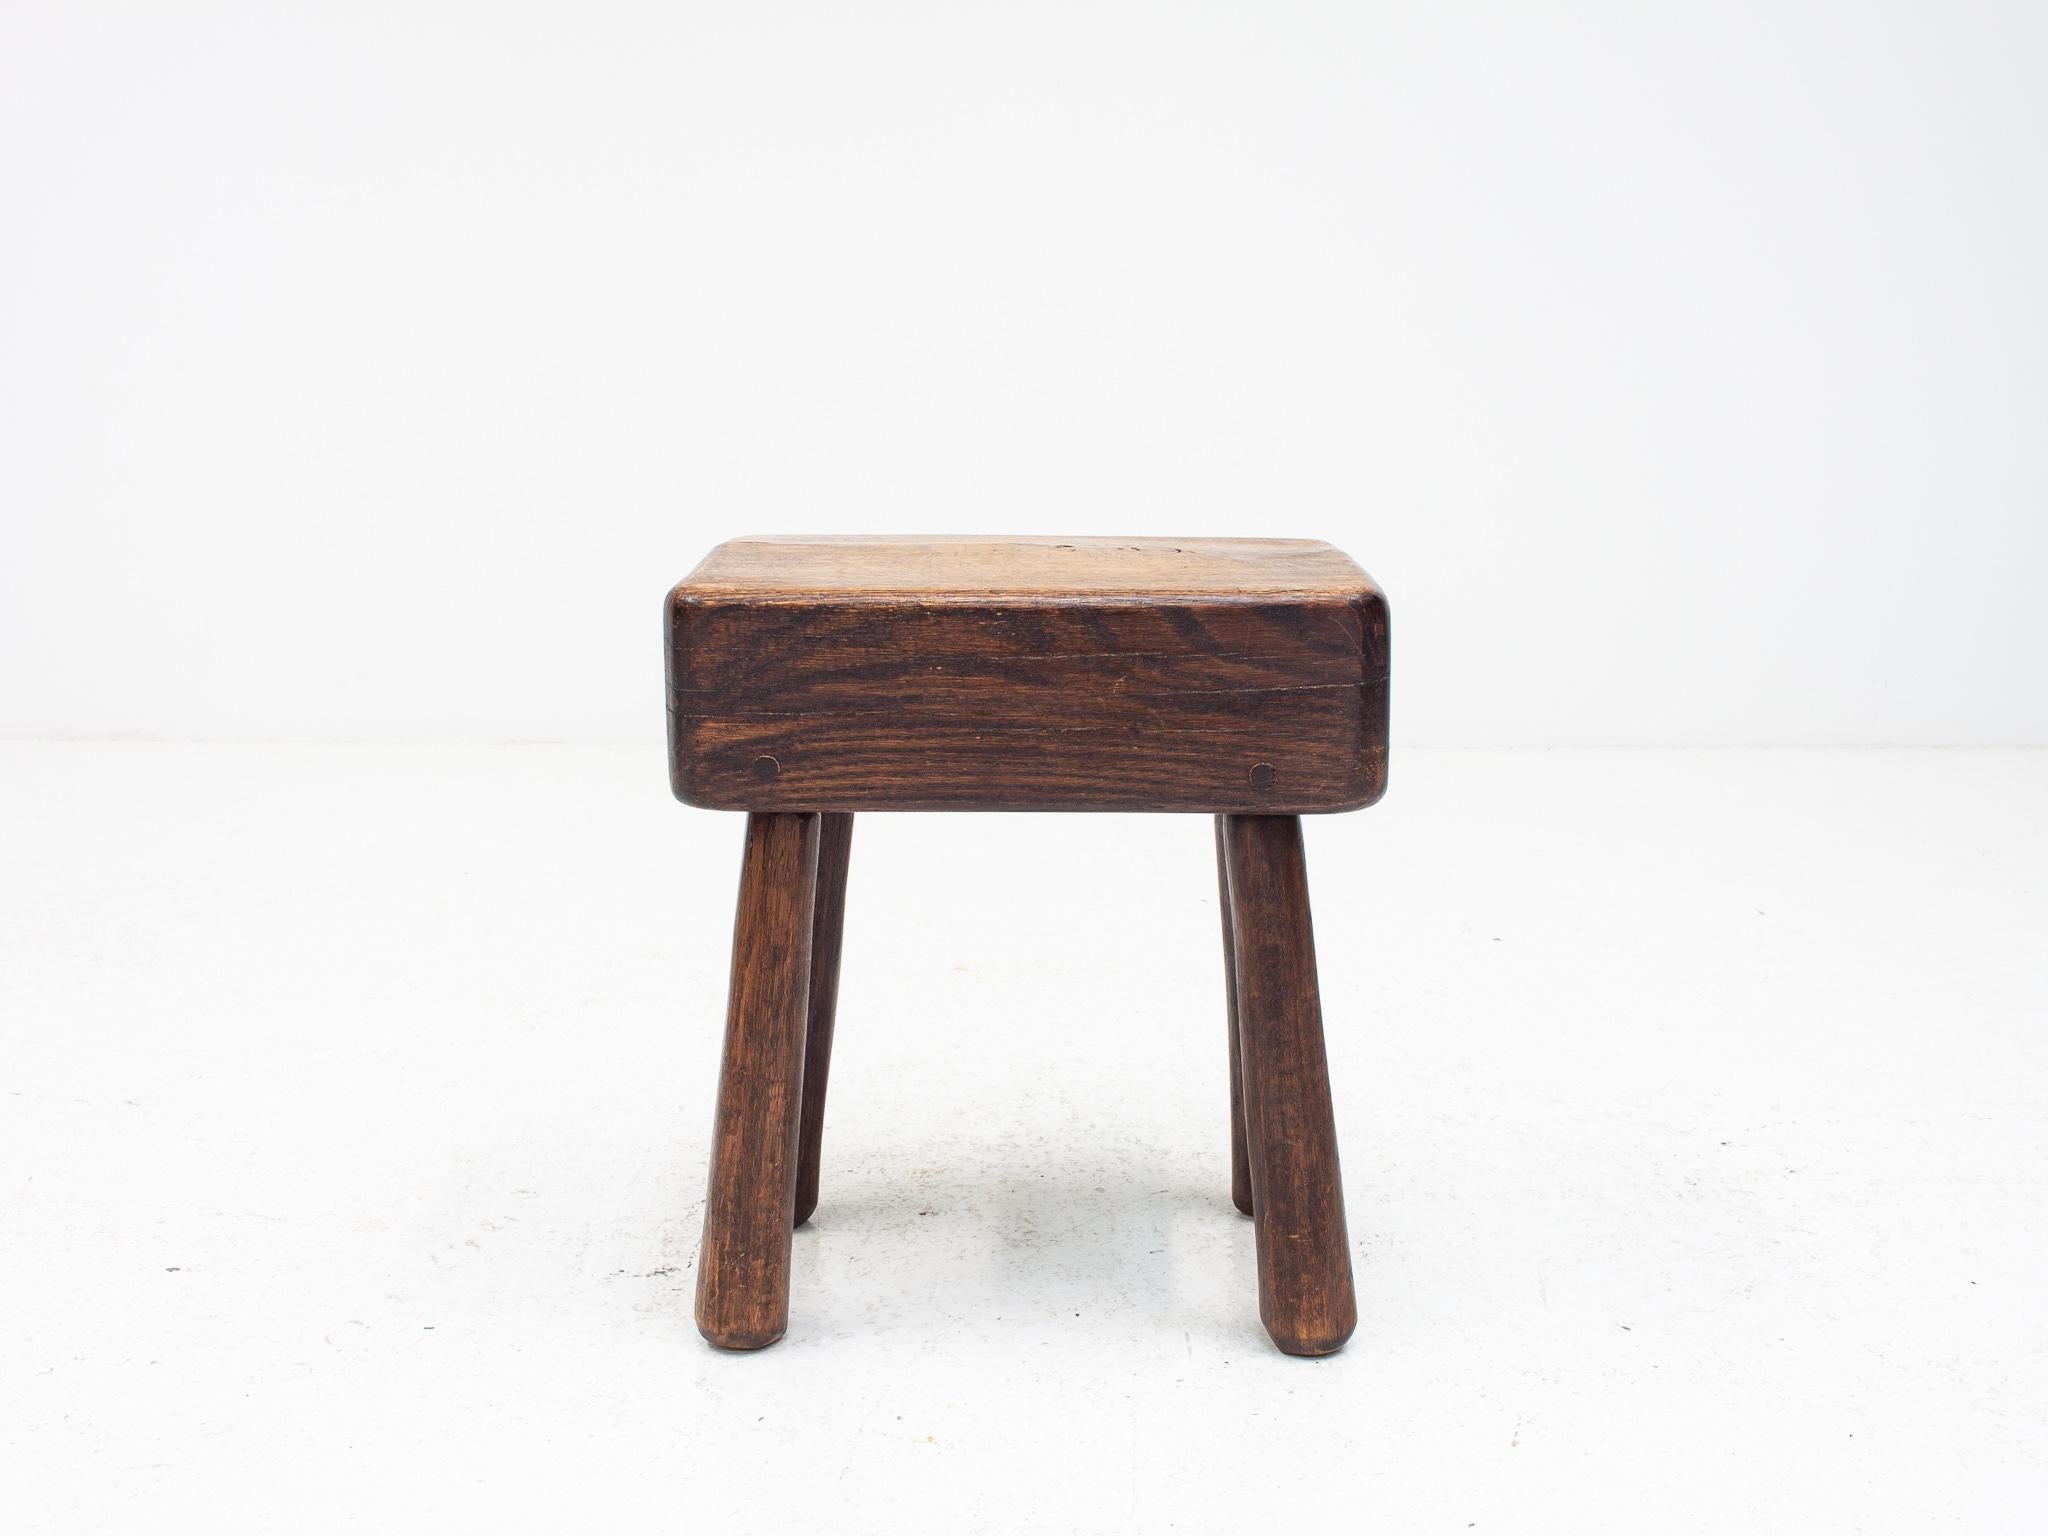  Rustic, Vintage Stool/Table, Belgium, 1900s For Sale 2